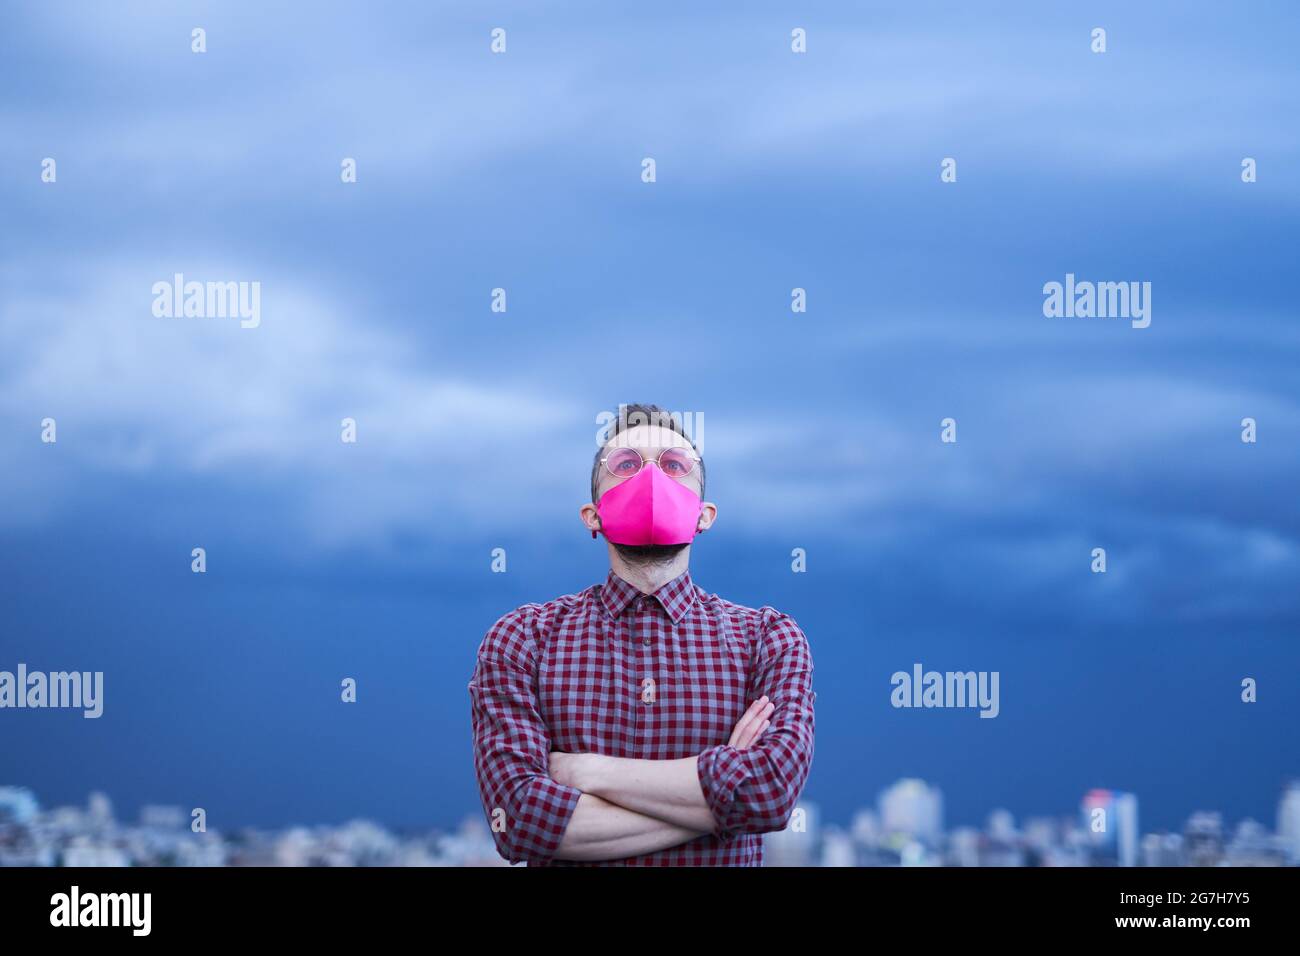 Concept of hope, LGBTQ theme. Attractive caucasian gay in pink protective face mask and pink eyeglasses looking up with hope. Male person portrait with rainy weather background and urban skyline Stock Photo